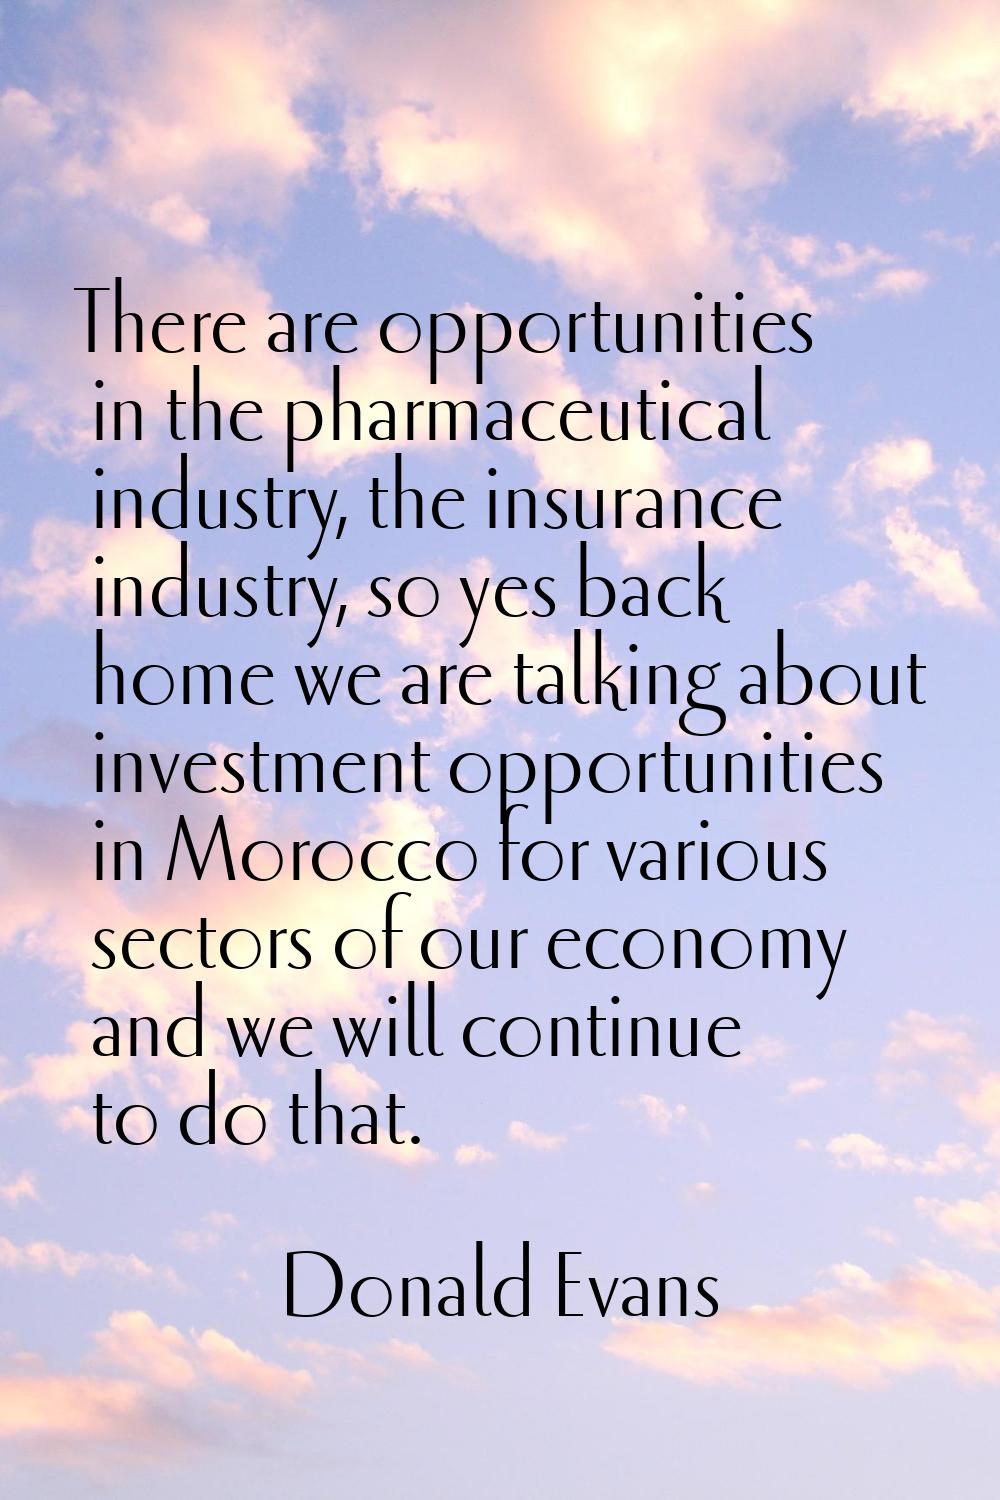 There are opportunities in the pharmaceutical industry, the insurance industry, so yes back home we